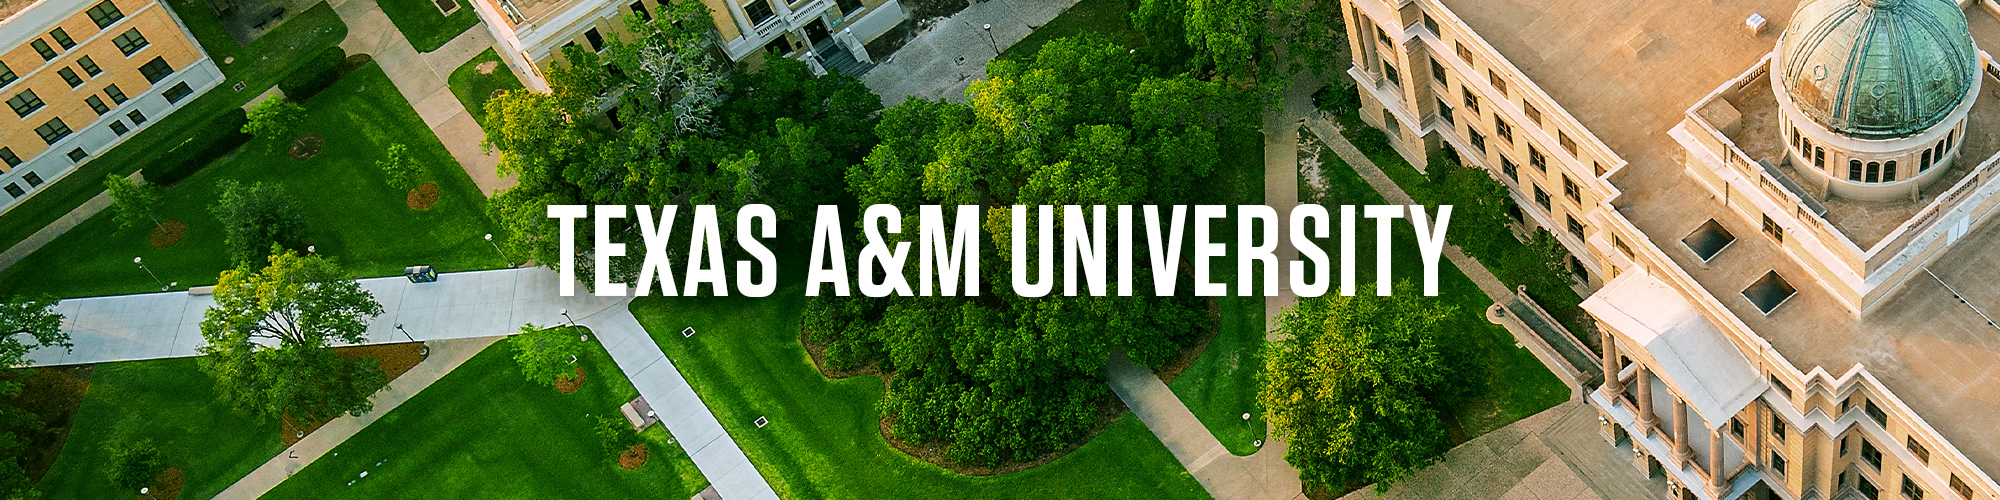 Texas A&M is the only public - Texas A&M University